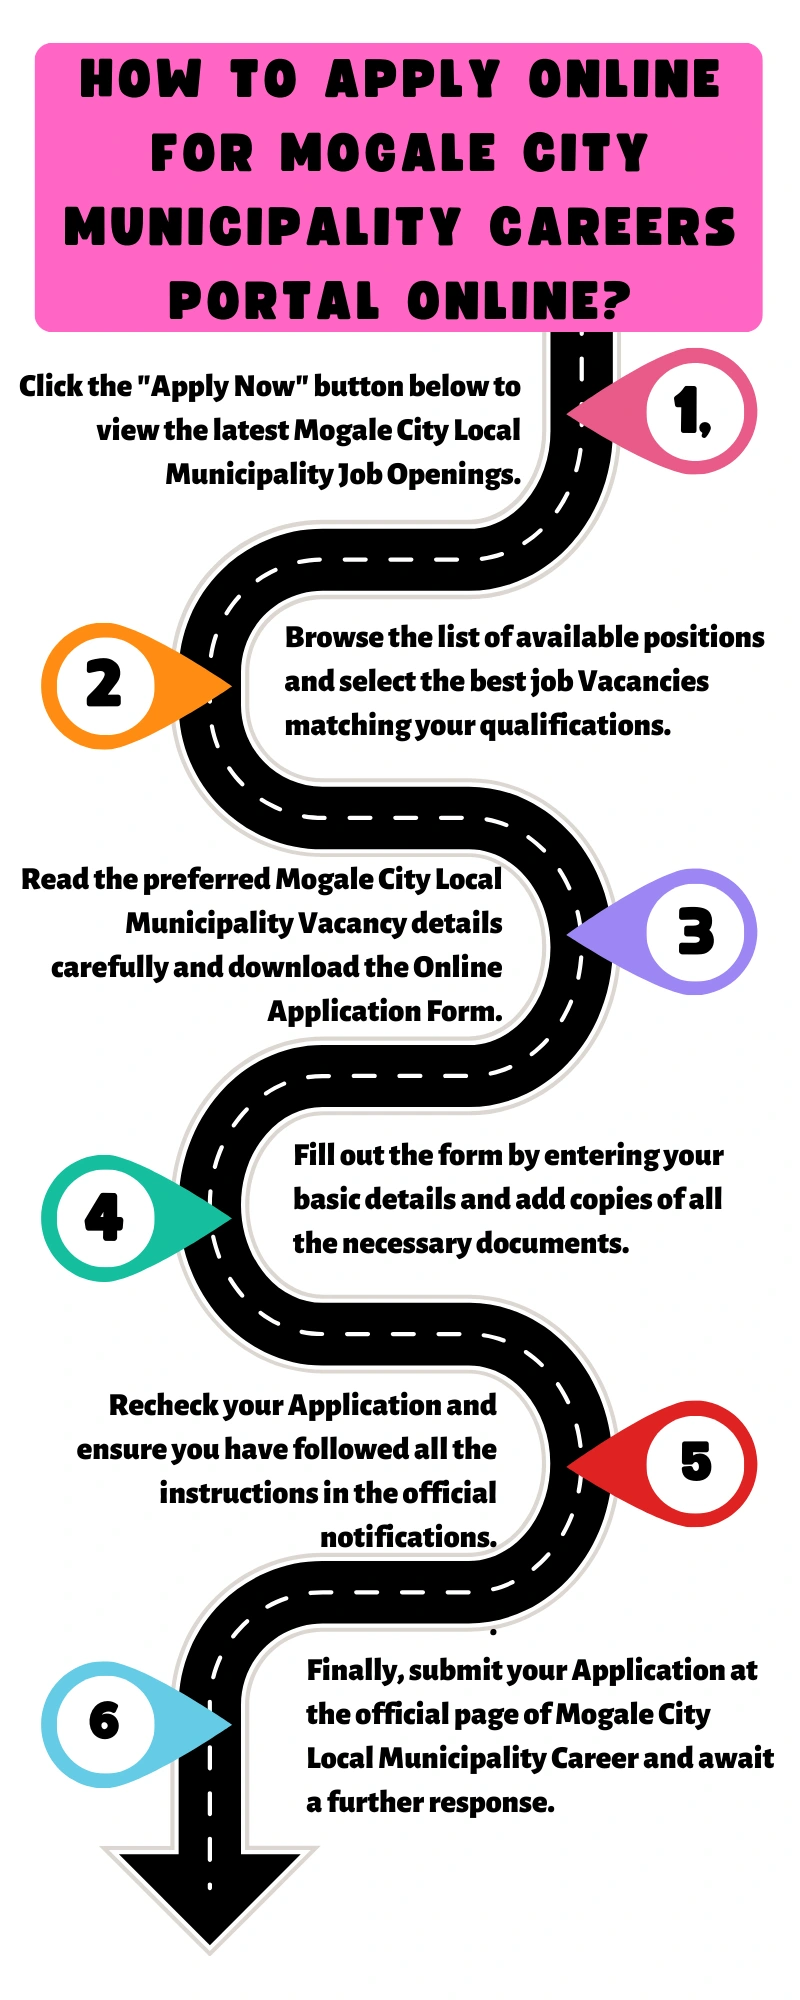 How to Apply Online for Mogale City Municipality Careers Portal Online?